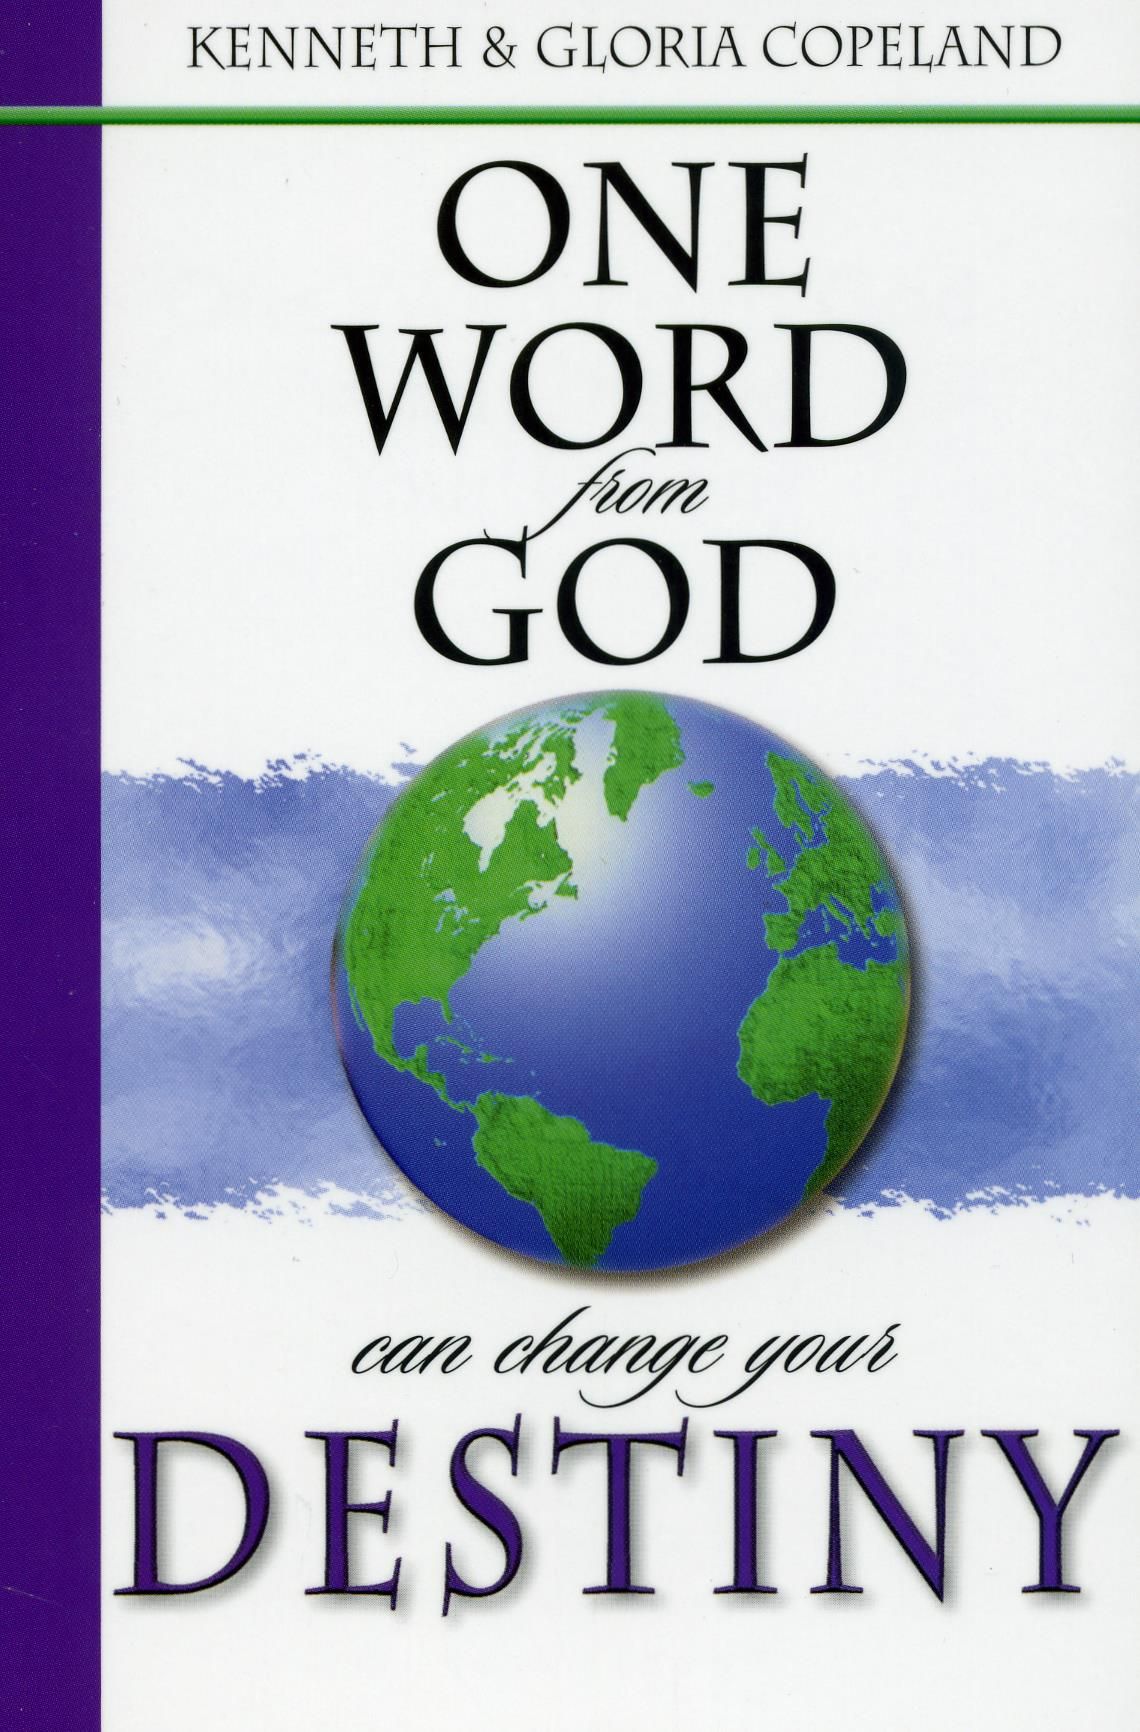 K. & G. Copeland: One Word from God can change your Destiny